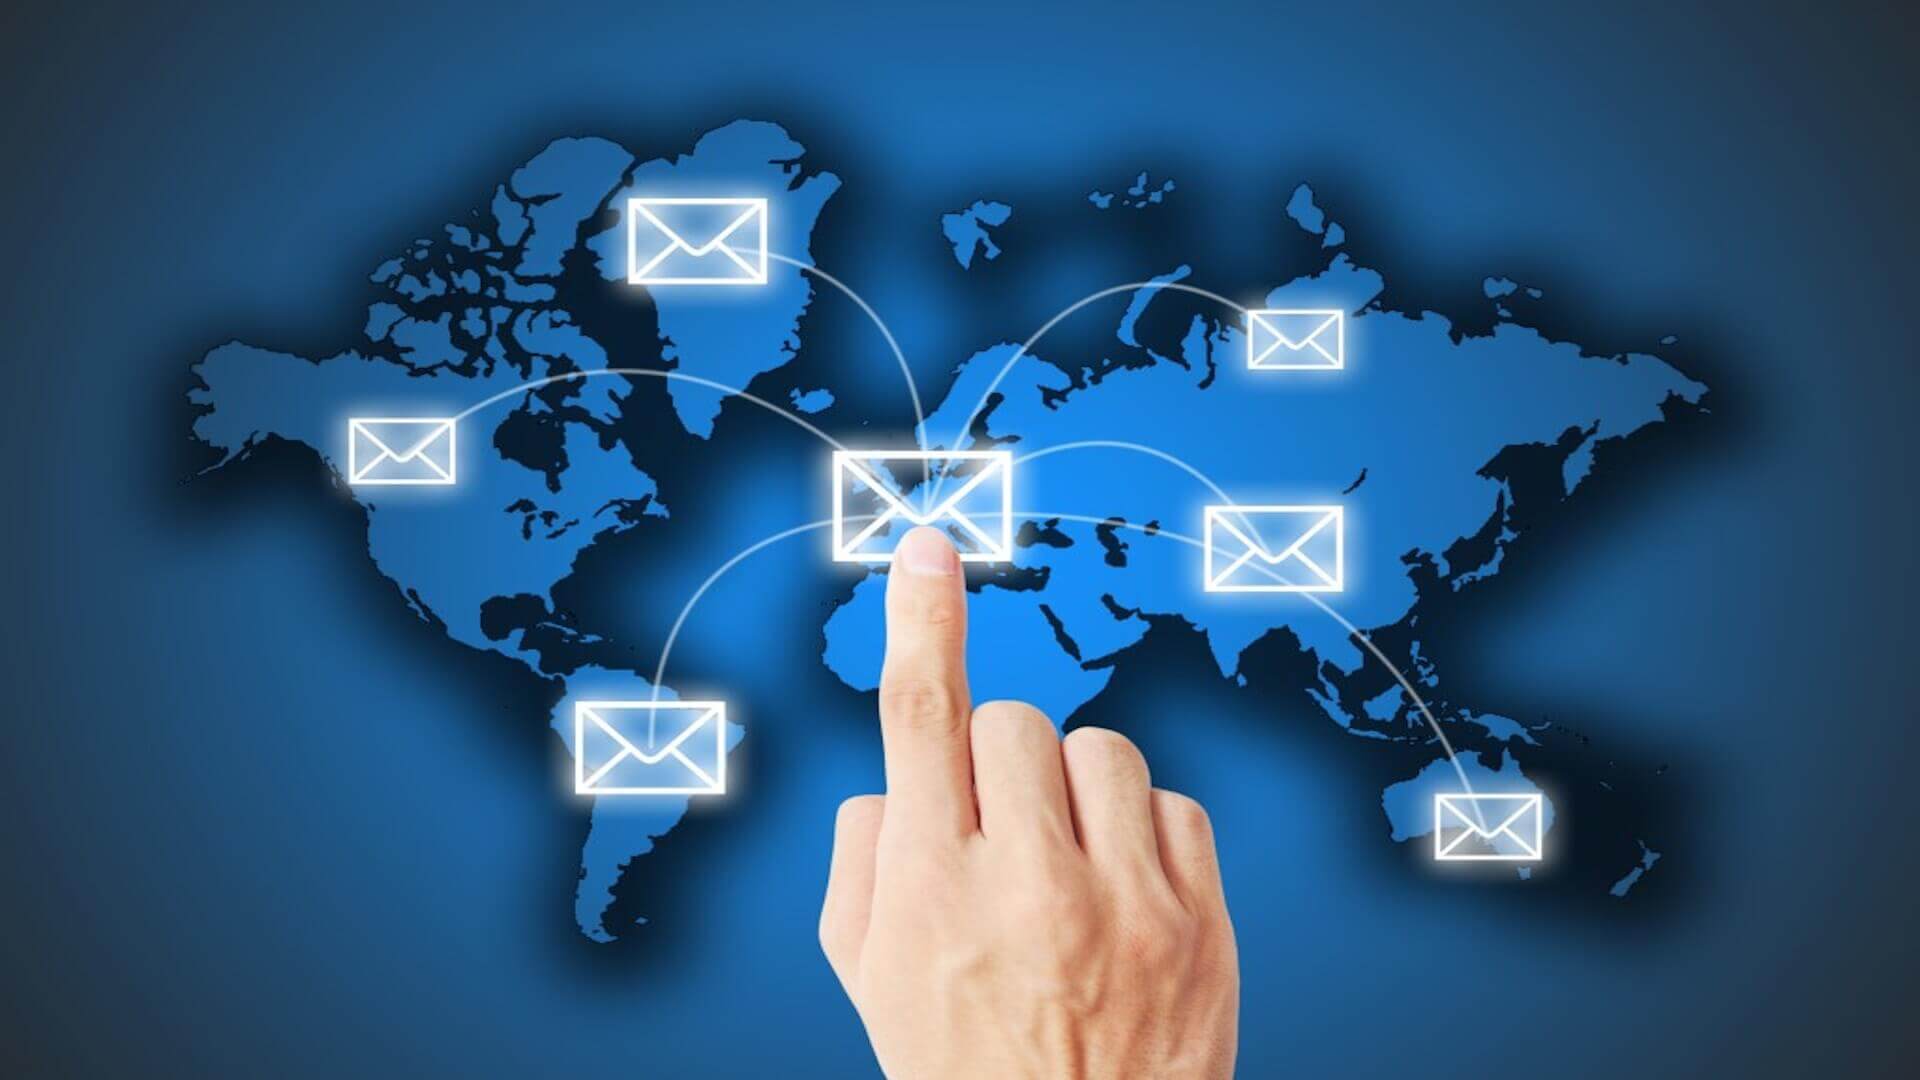 Welcome emails have best click-to-open and first purchase rates